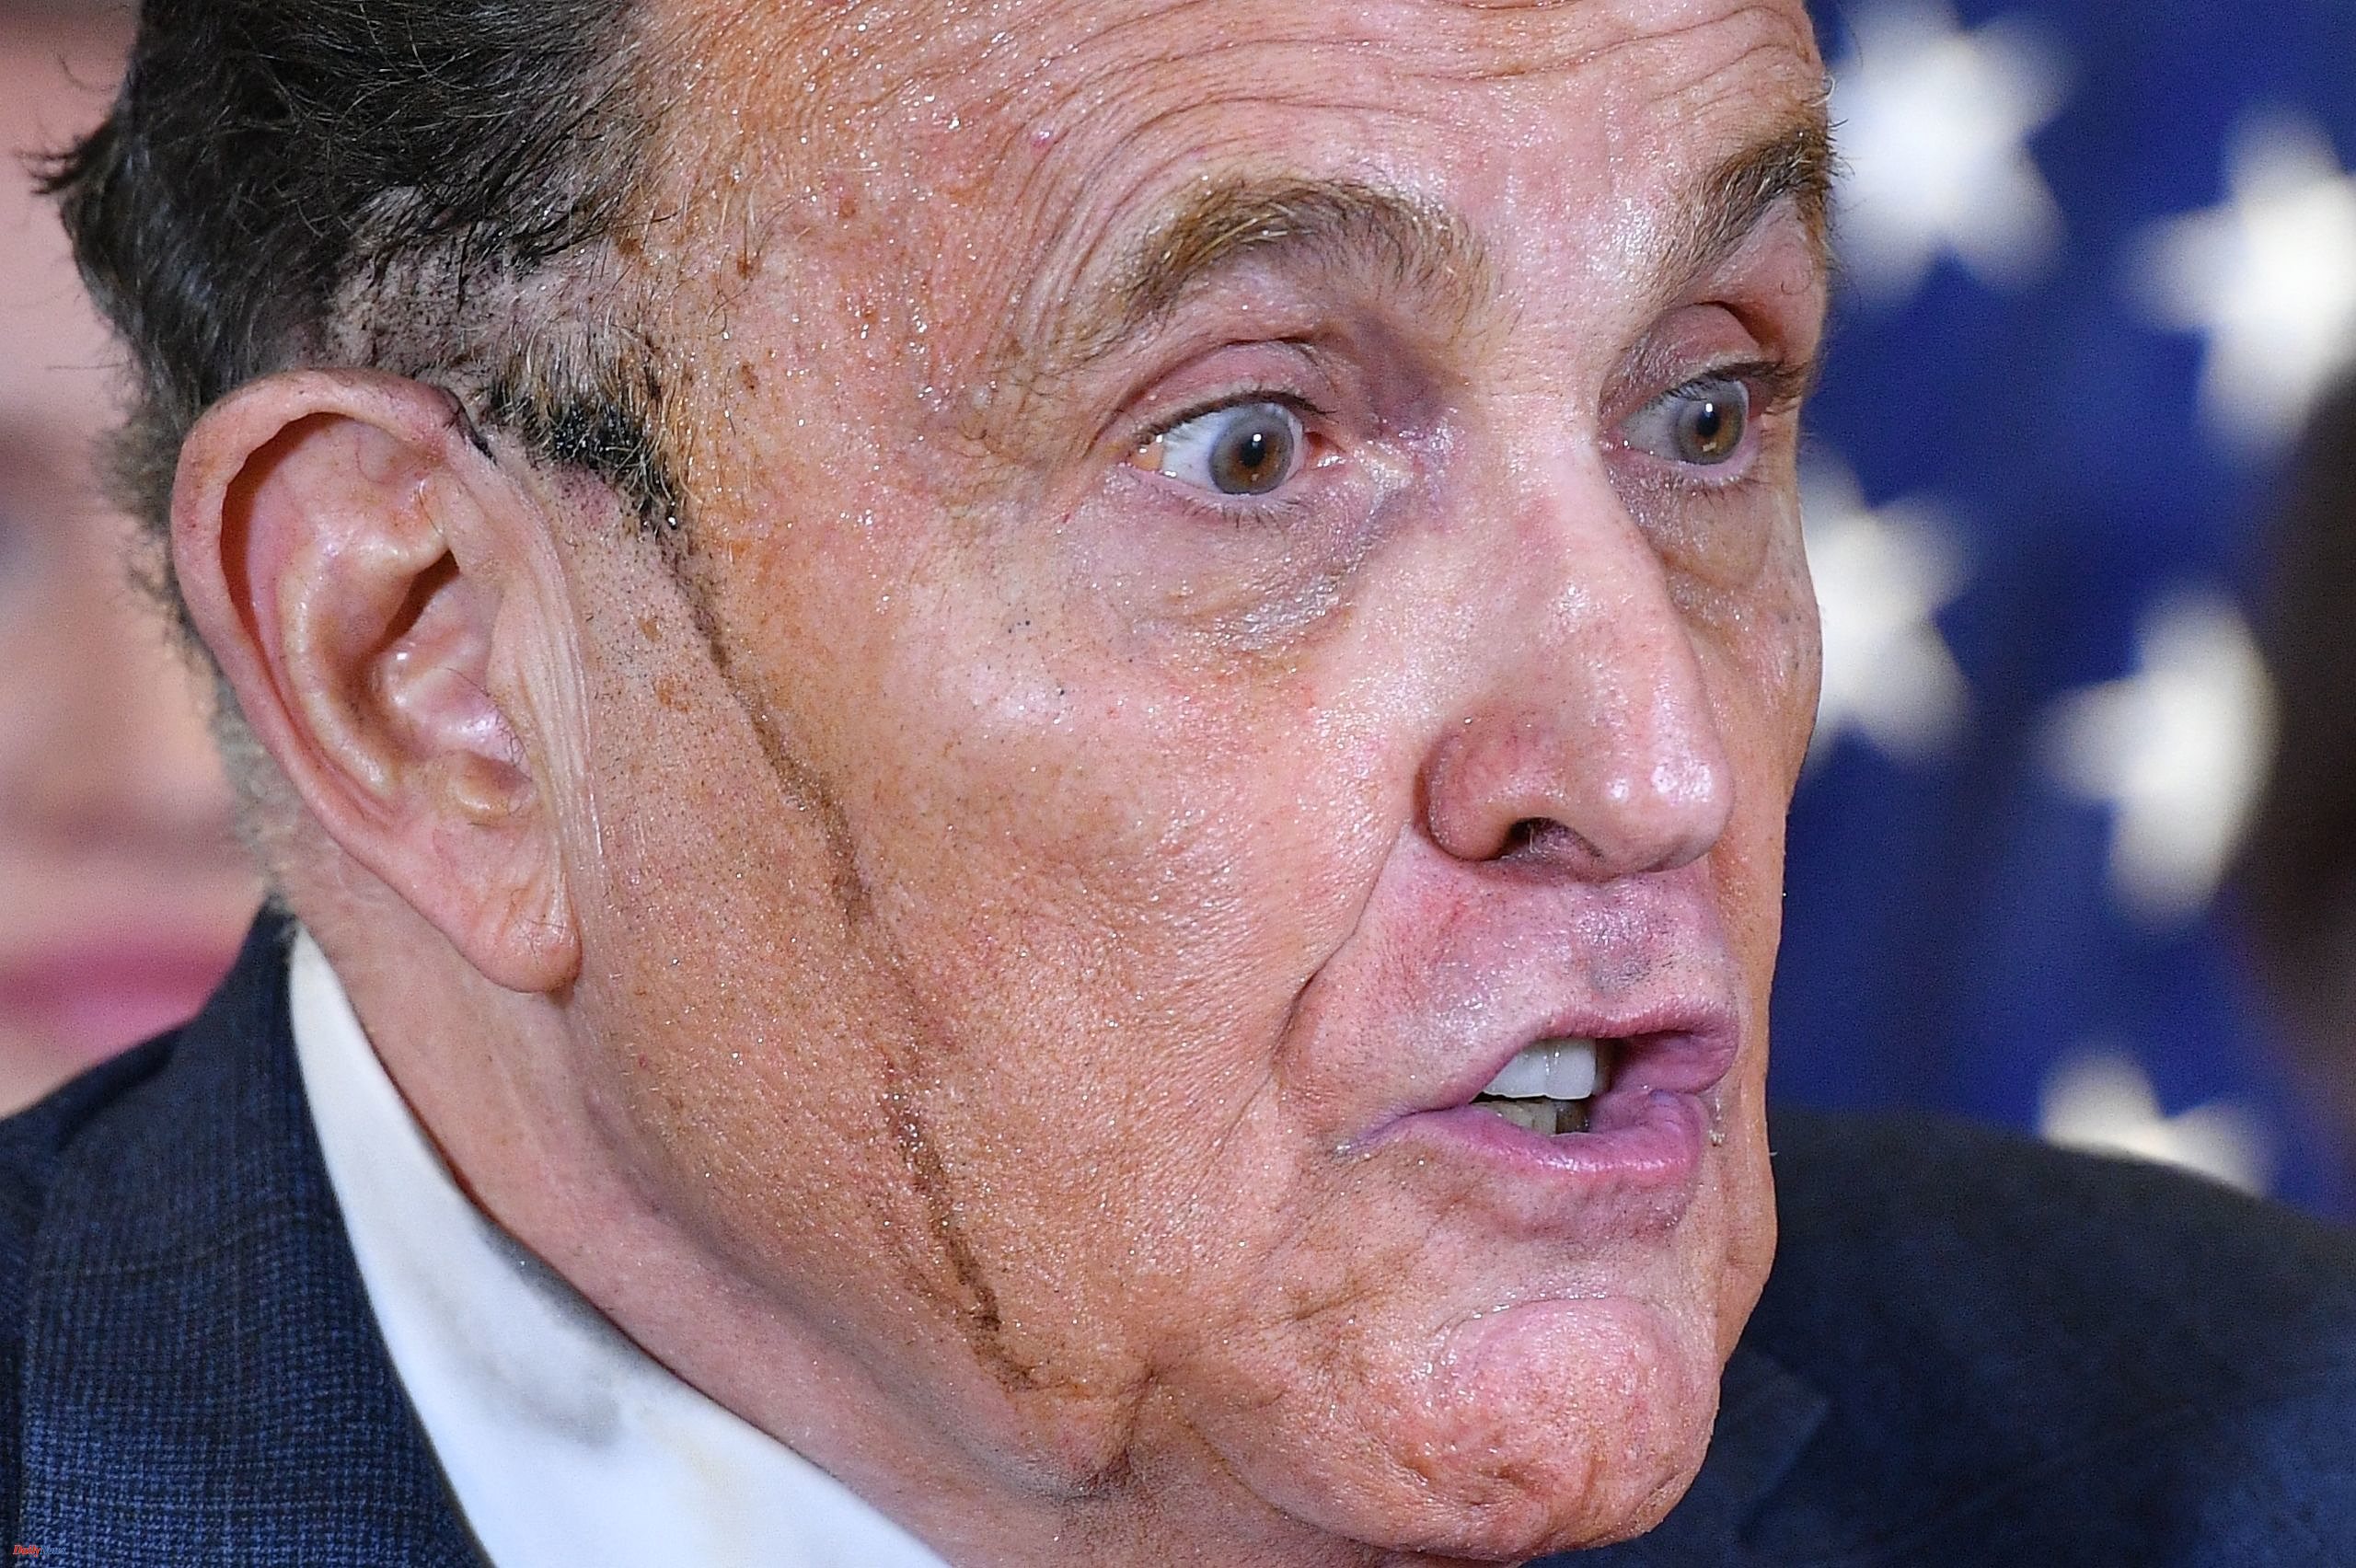 USA Rudy Giuliani, Trump's former lawyer, declares bankruptcy after his million-dollar conviction for defamation